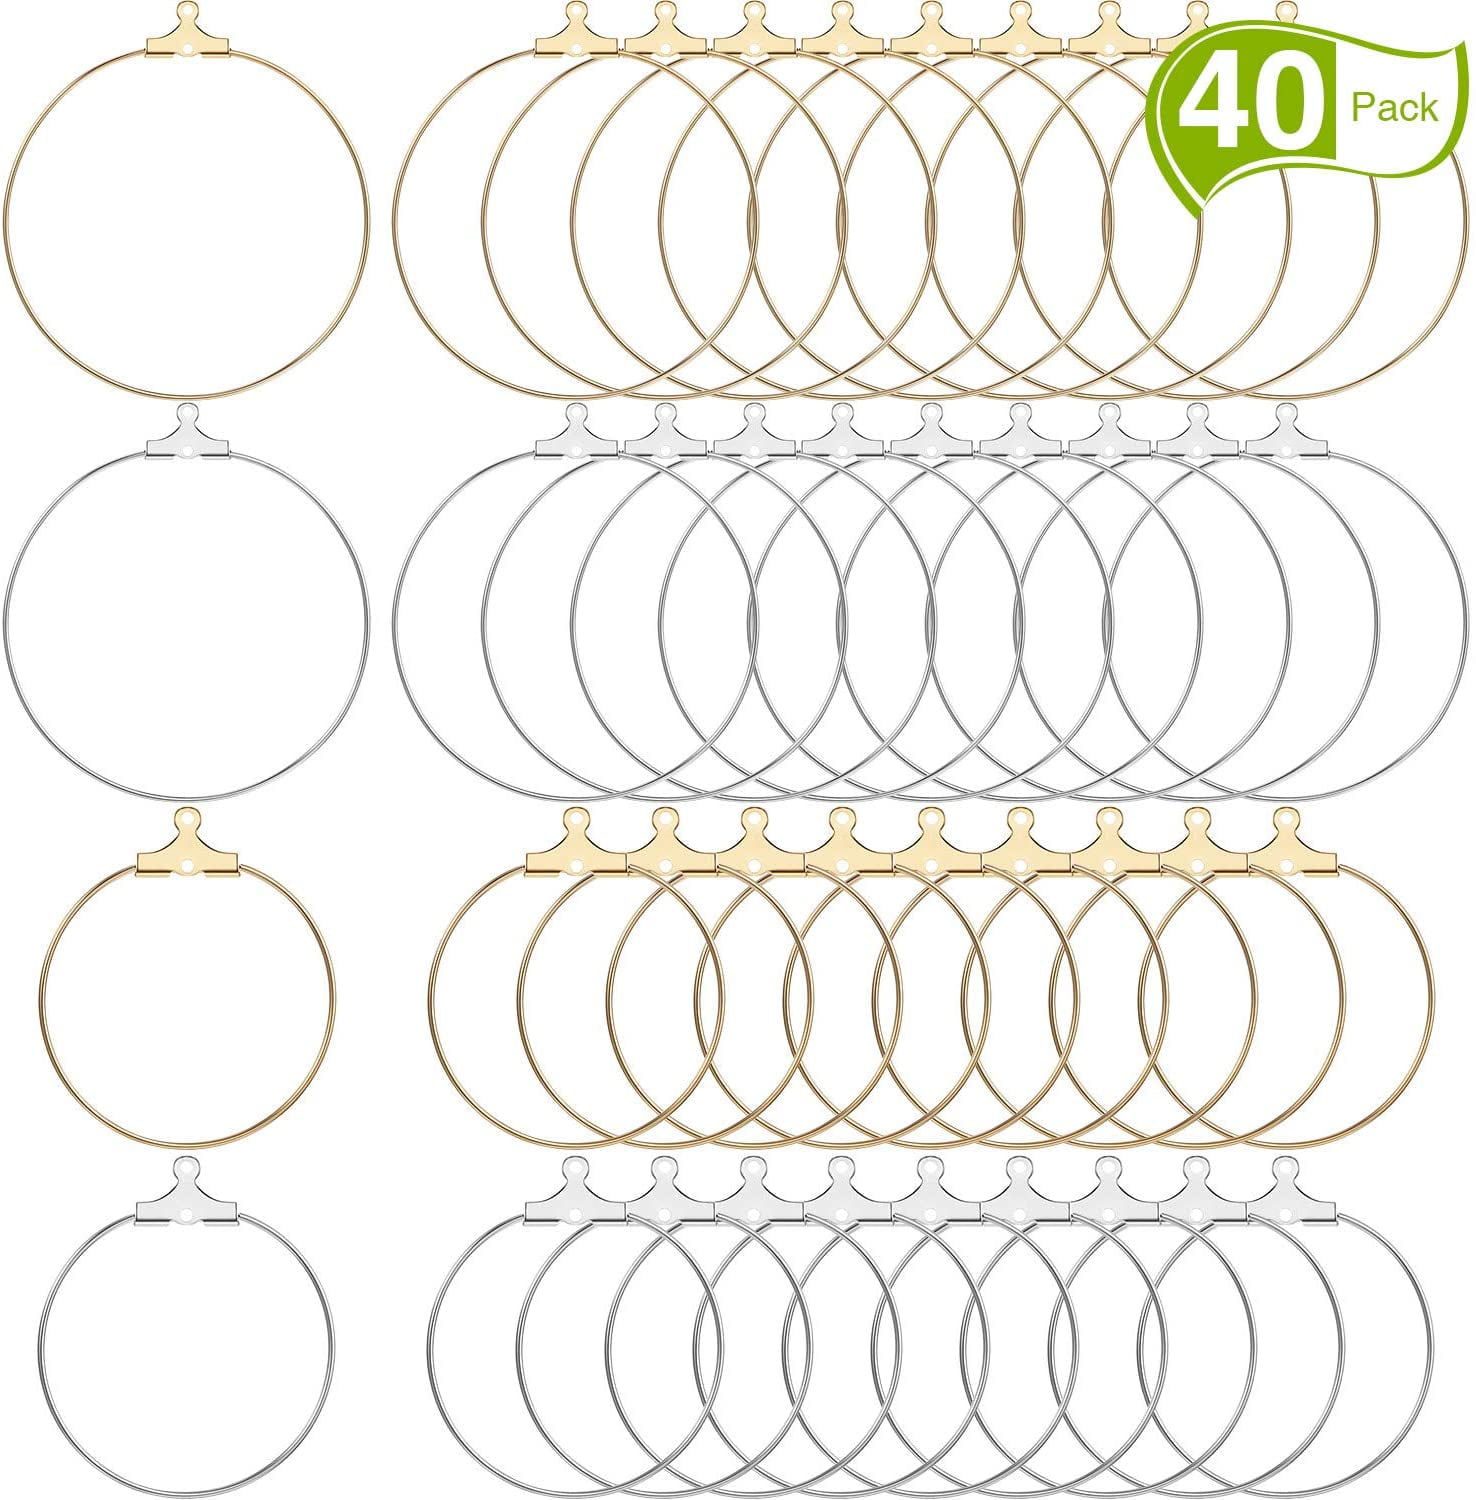 120pcs Beading Hoop Earrings for Jewelry Making,Earrings Beading Hoop Round  Beading Hoop Earring Circle Connectors Earring Finding for DIY